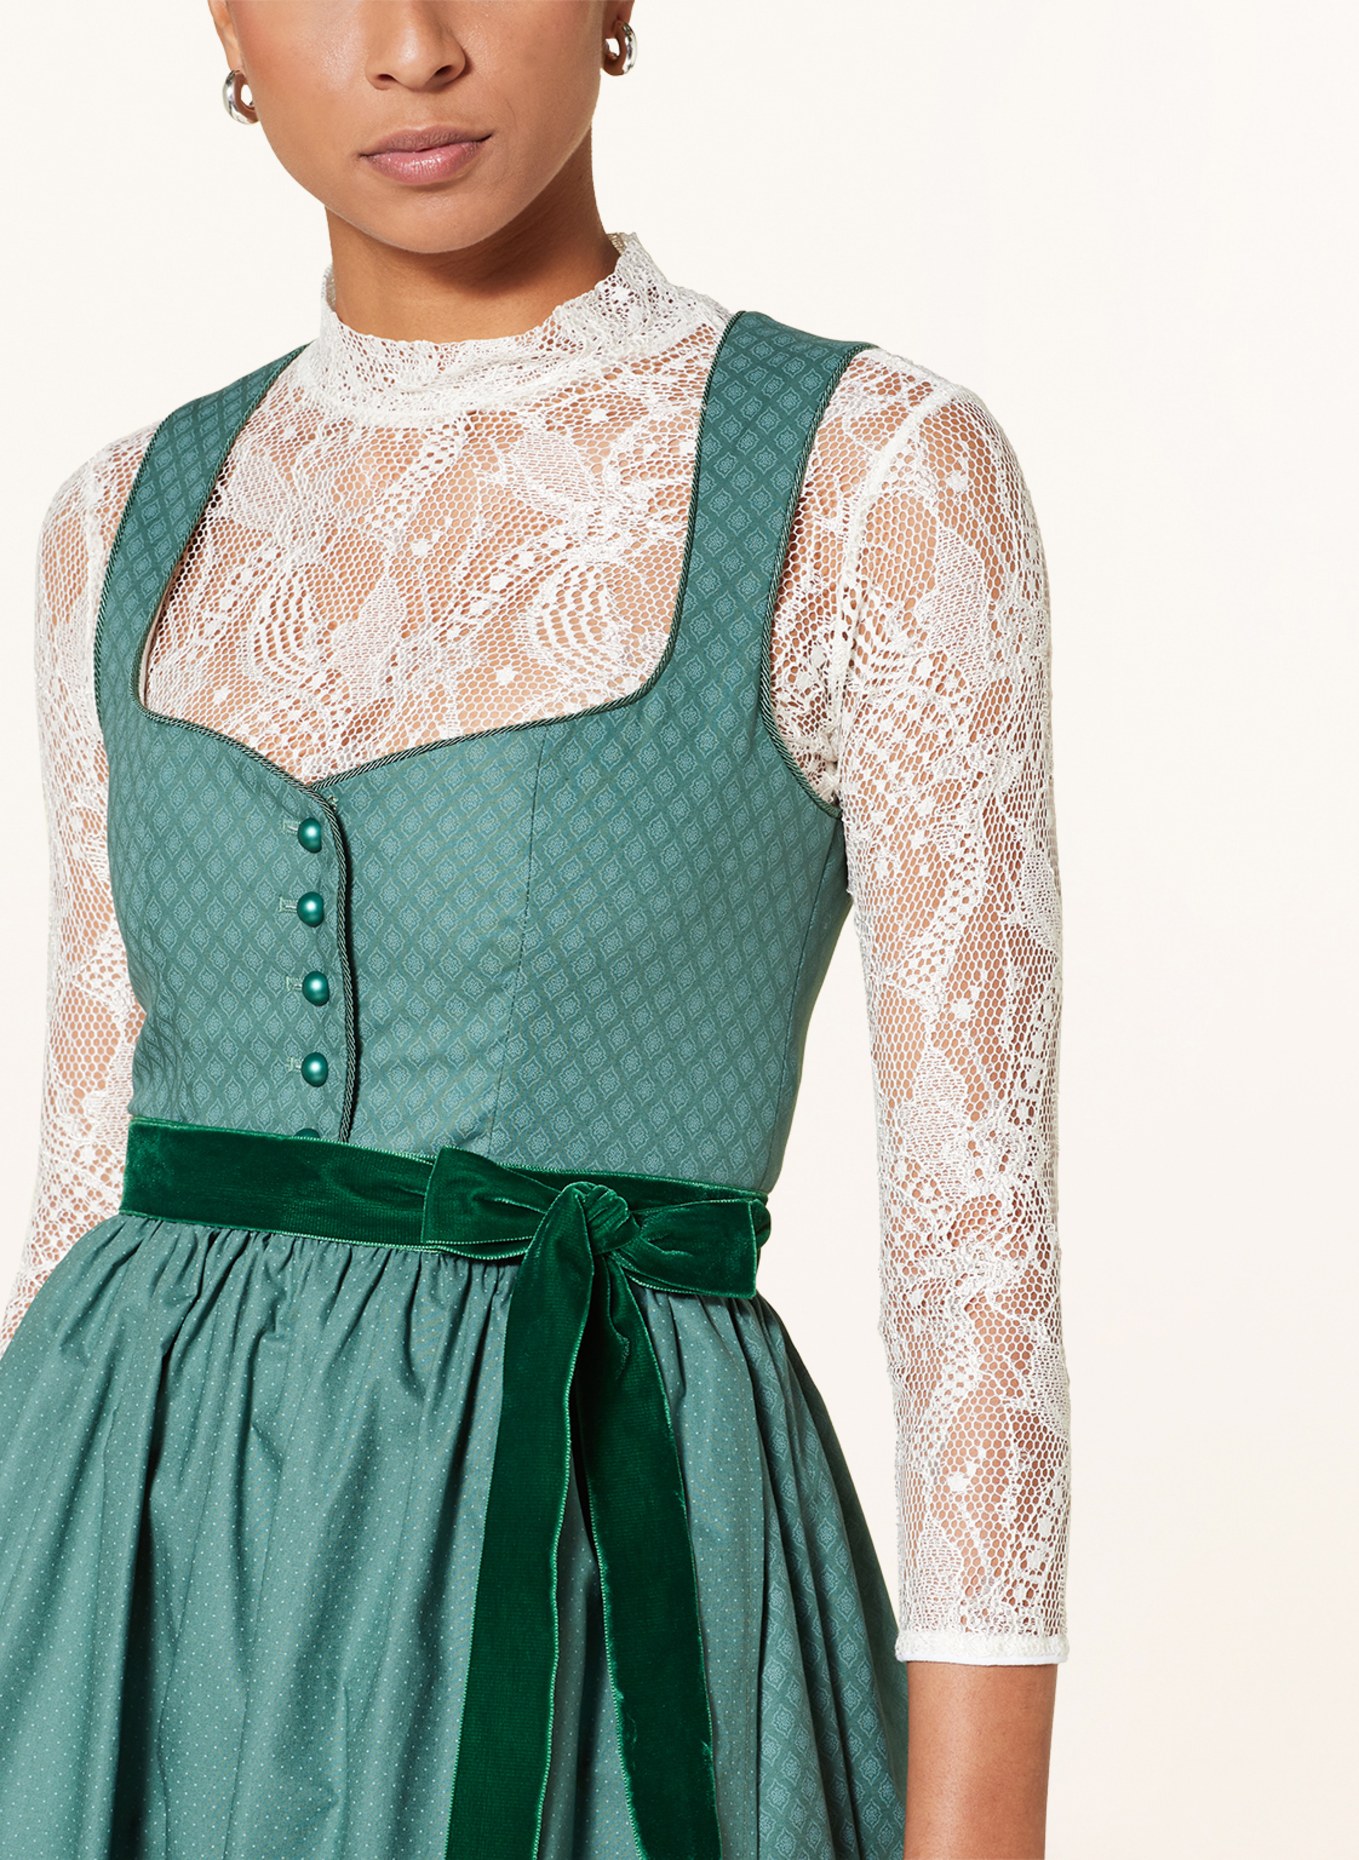 KINGA MATHE Dirndl blouse LINA with 3/4 sleeves and lace, Color: ECRU (Image 3)